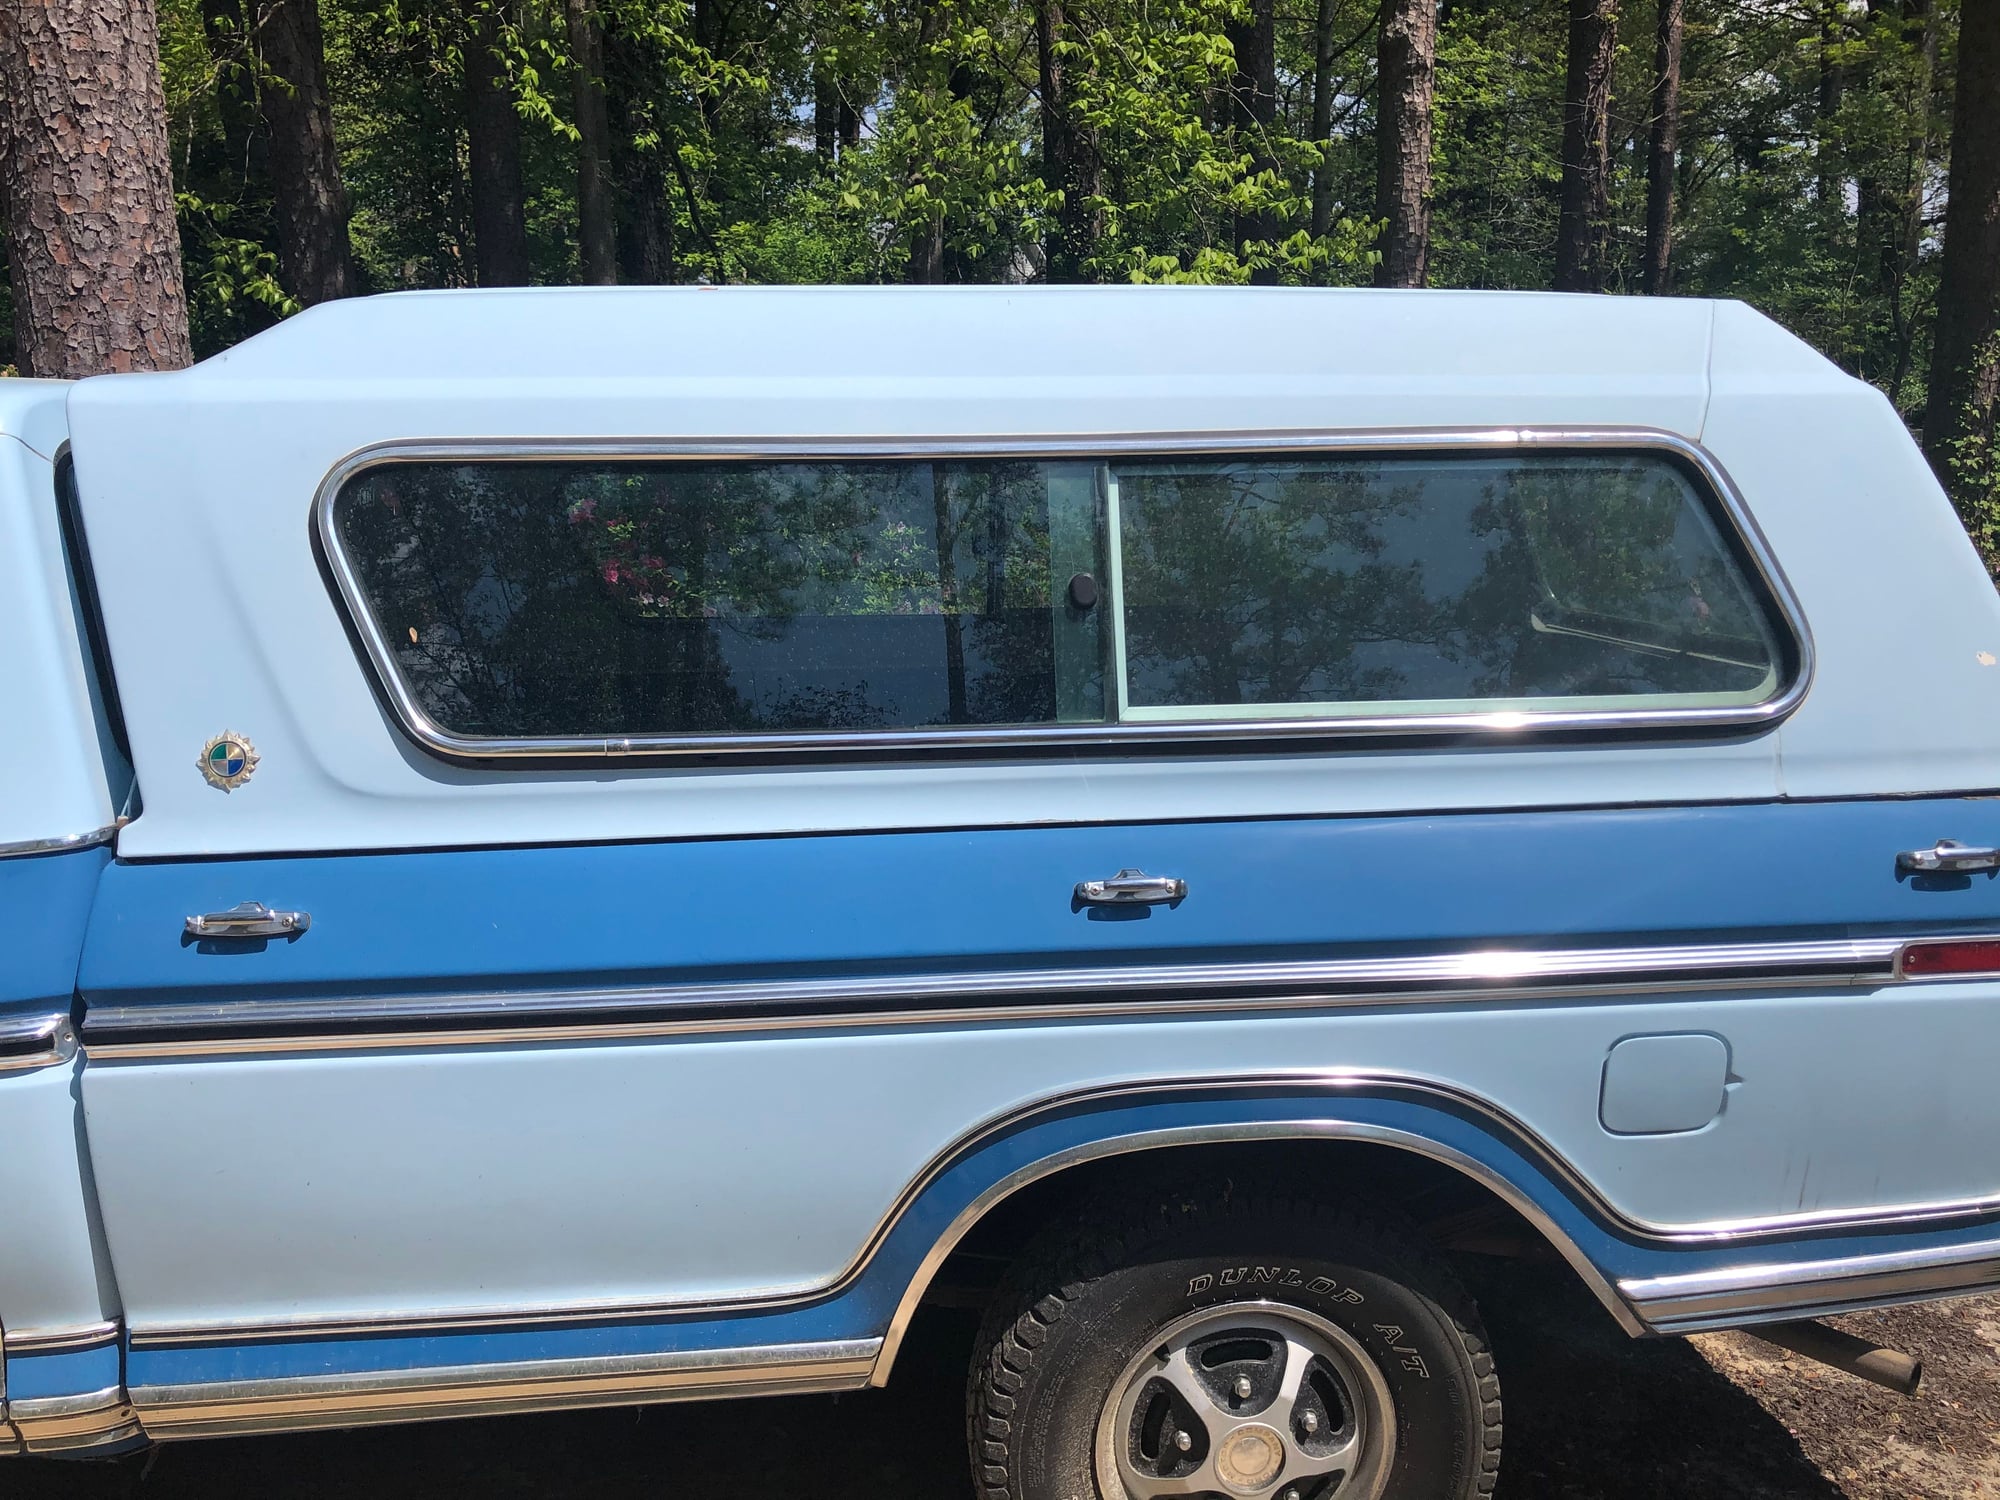 Exterior Body Parts - OEM 1978 Ford F150 Camper Shell for Long Bed - Used - 1976 to 1979 Ford 1/2 Ton Pickup - Virginia Beach, VA 23452, United States